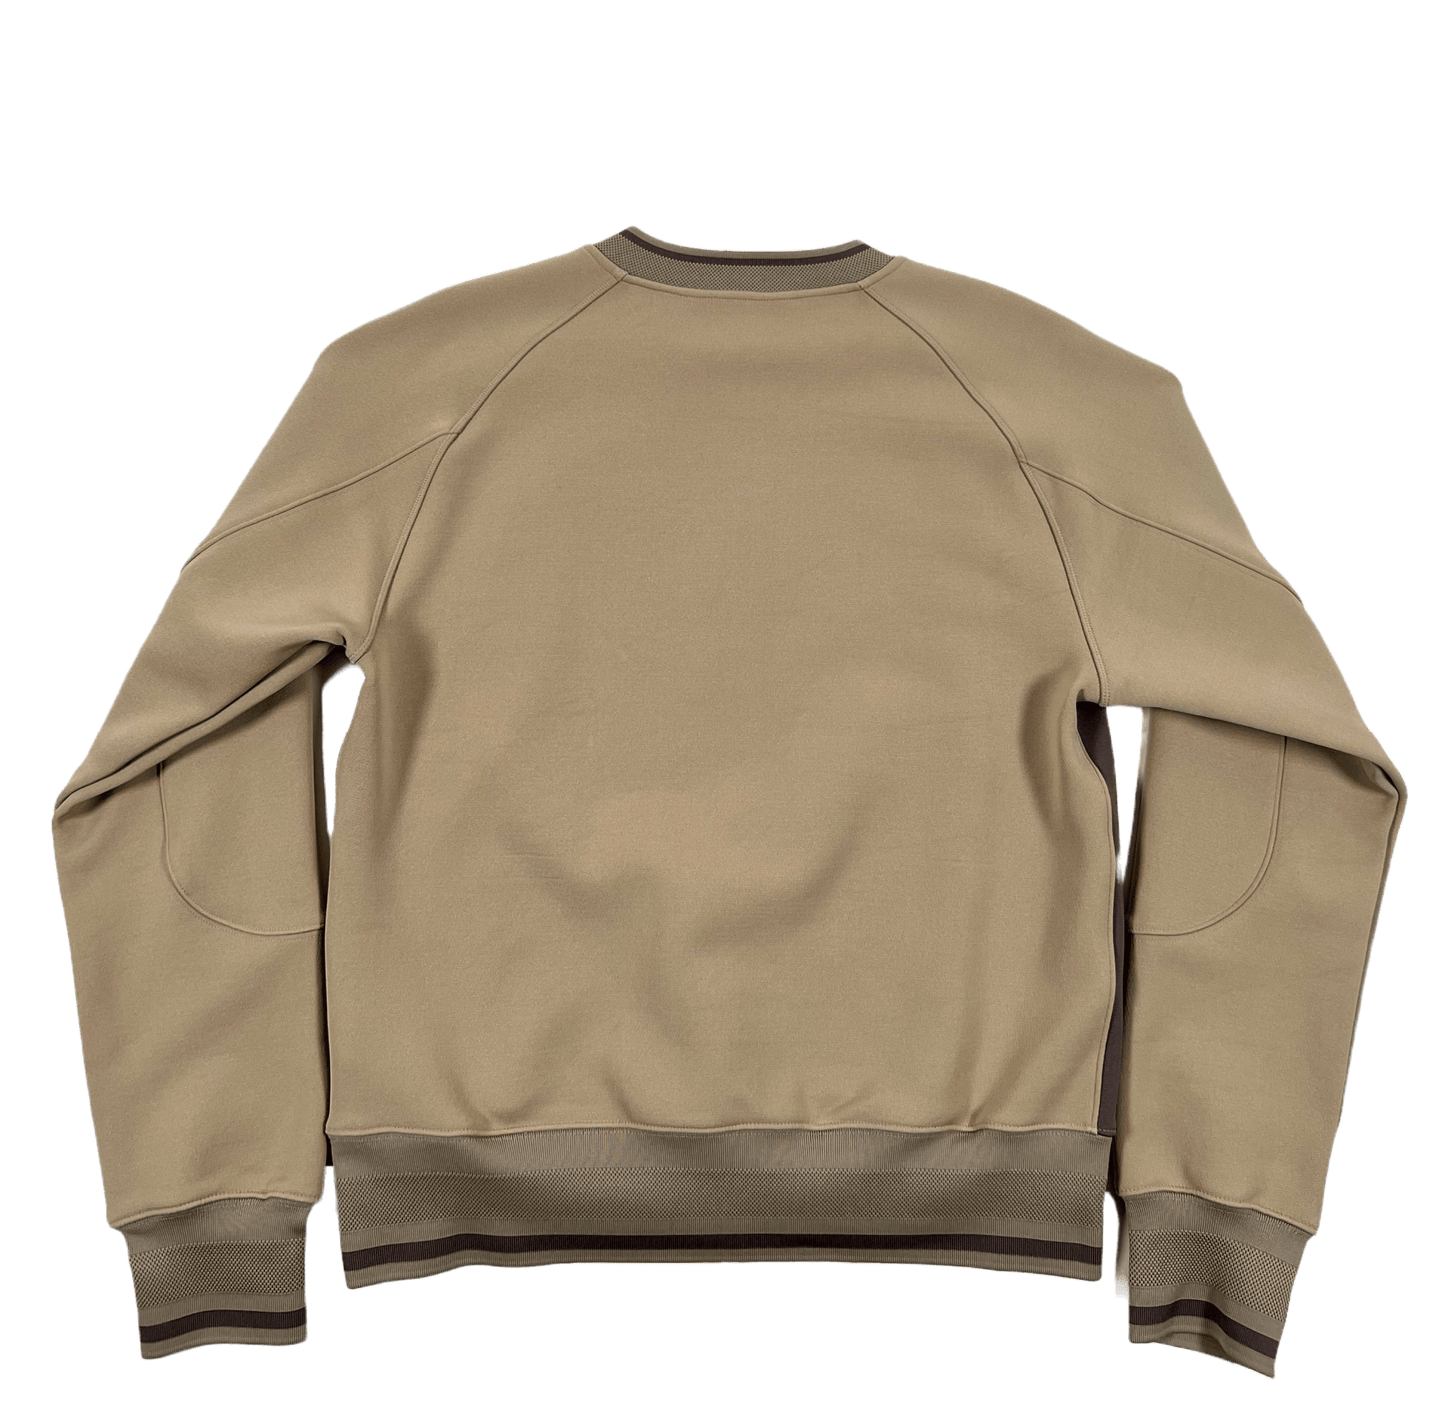 The back view of a beige polyester ADIDAS x Y-3 sweatshirt.